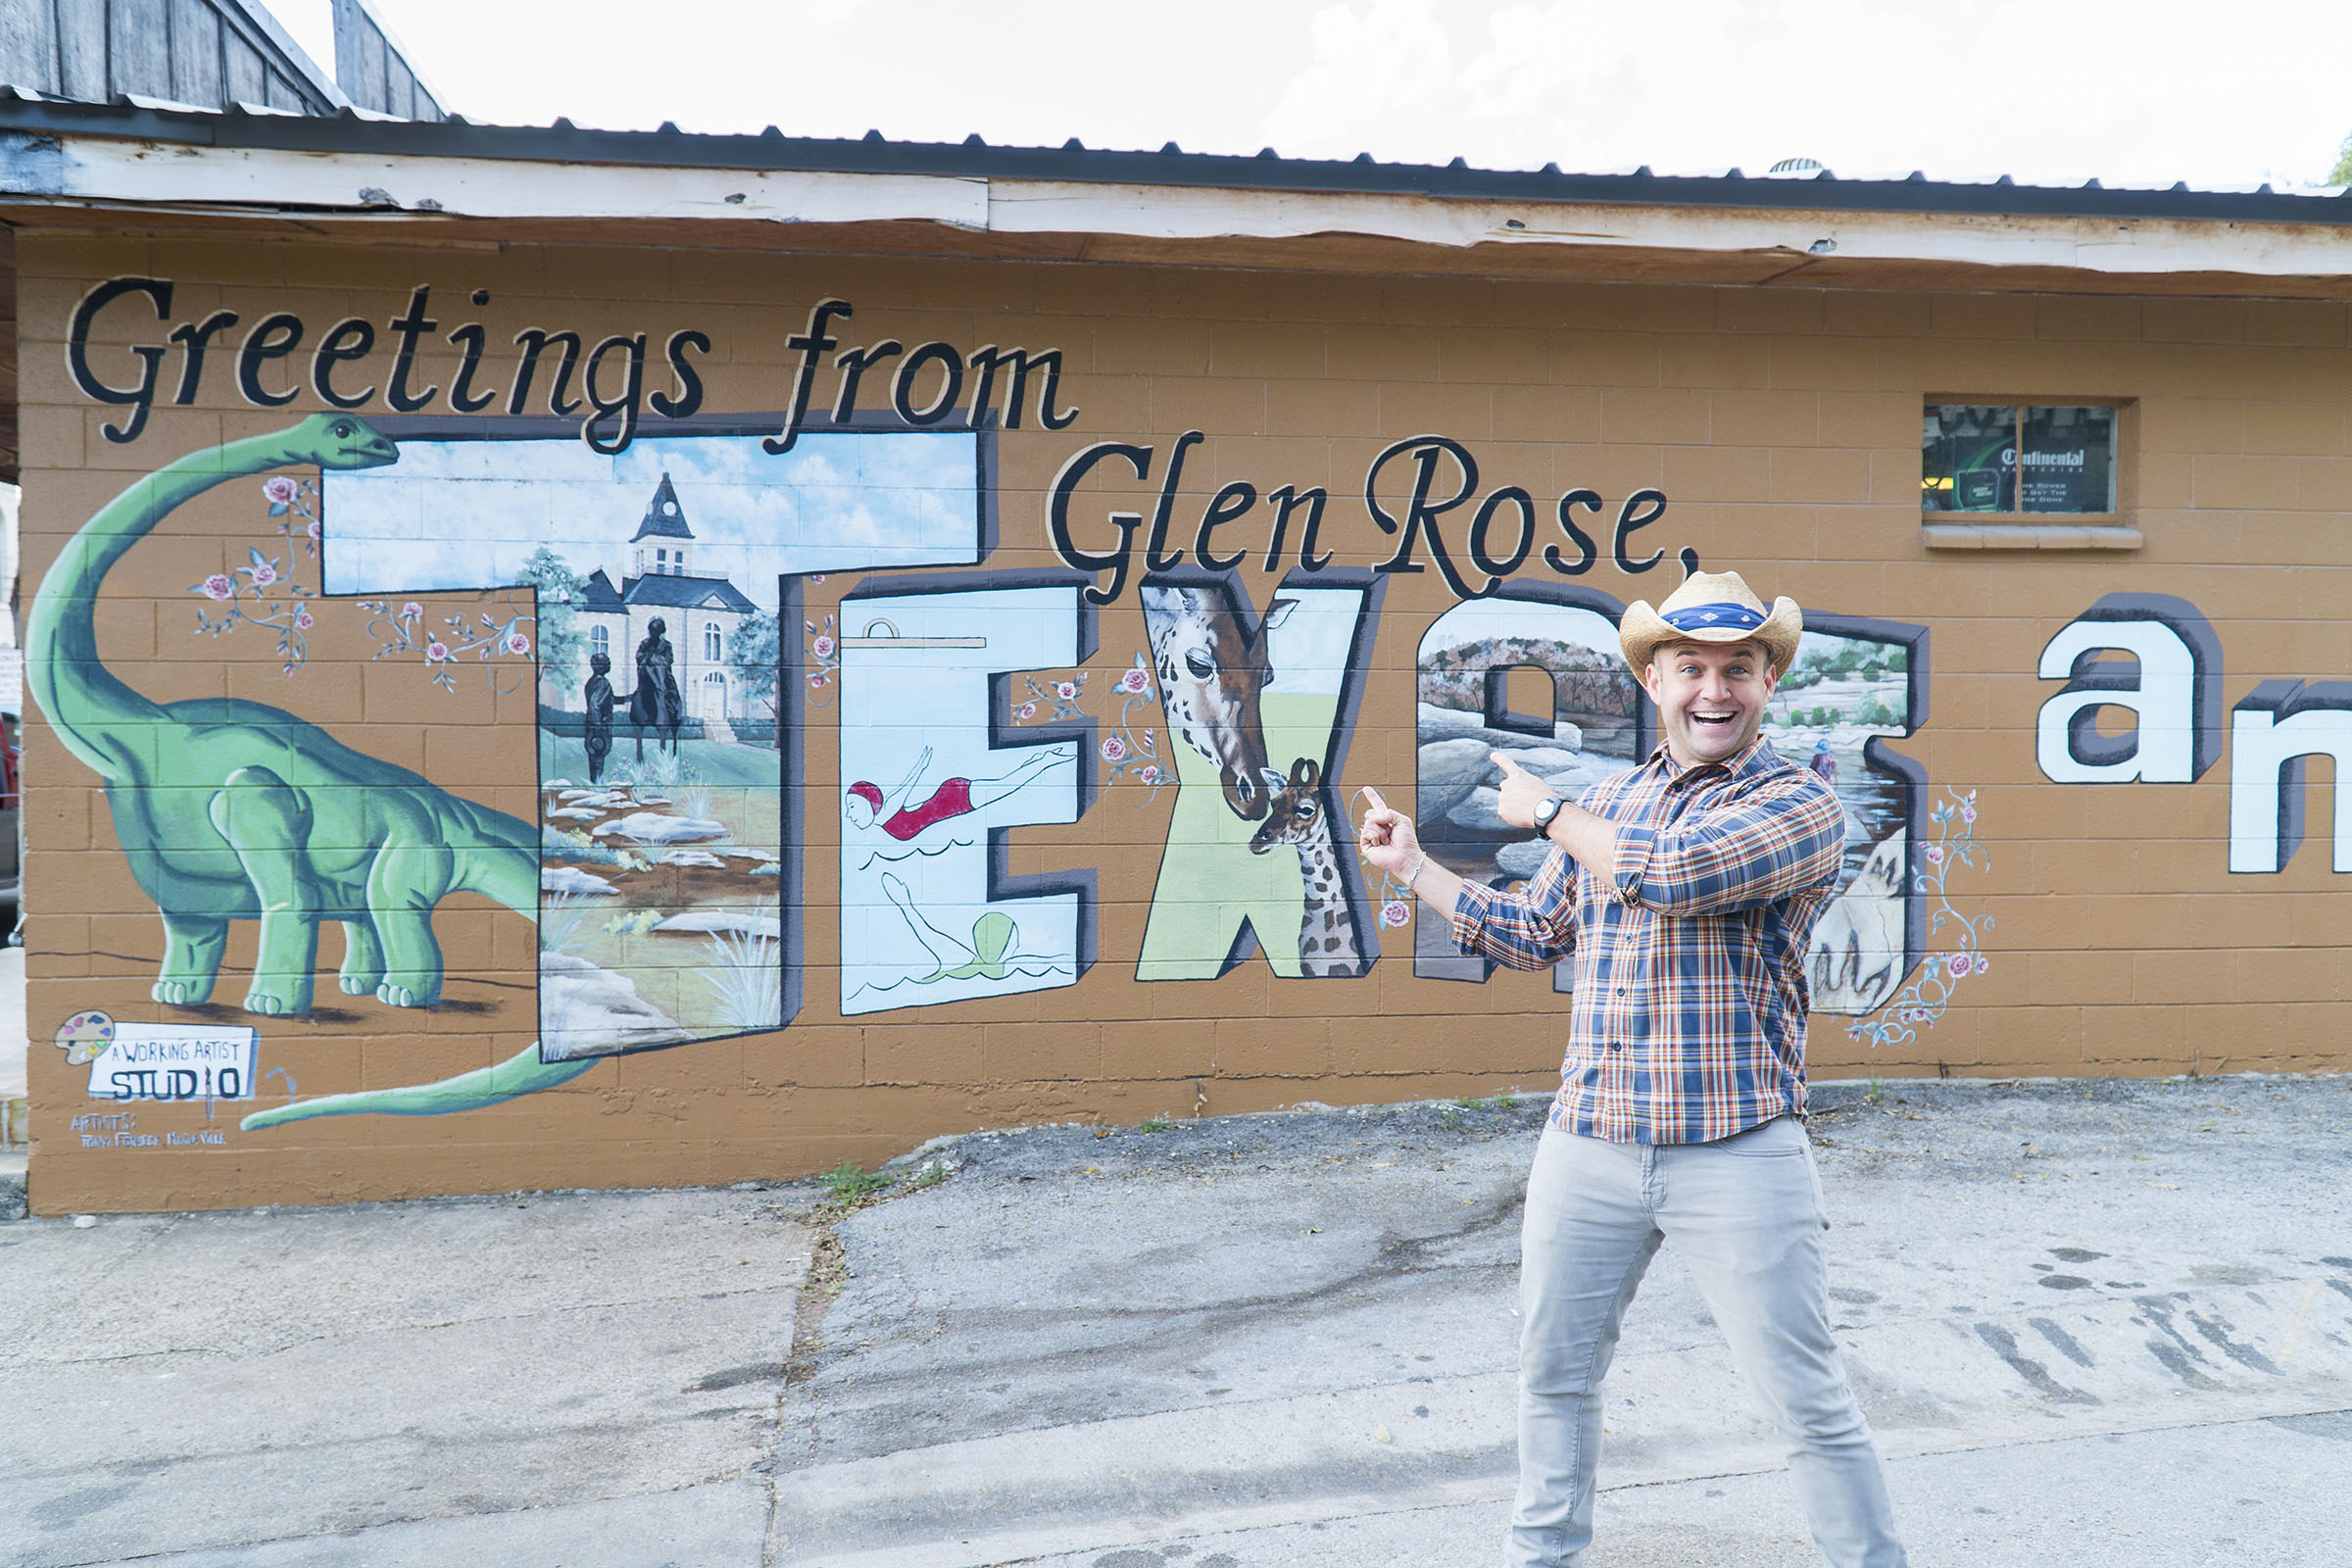 The Daytripper, Chet Garner, poses outside of a mural featuring a dinosaur that says "Greetings from Glen Rose Texas"